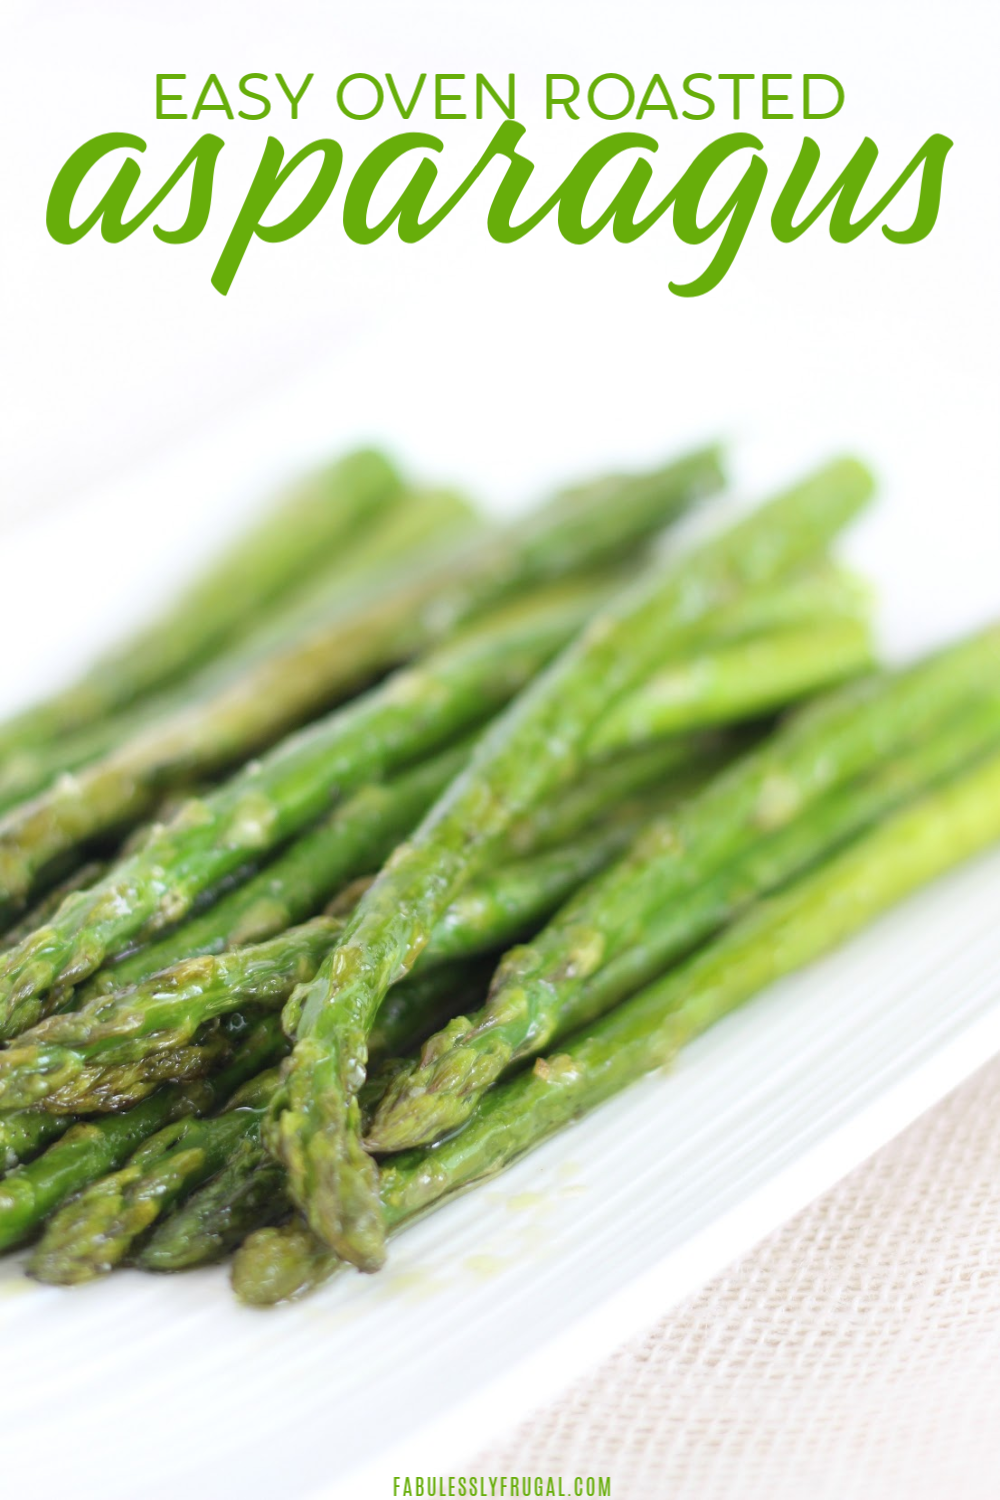 Easy oven-roasted asparagus recipe